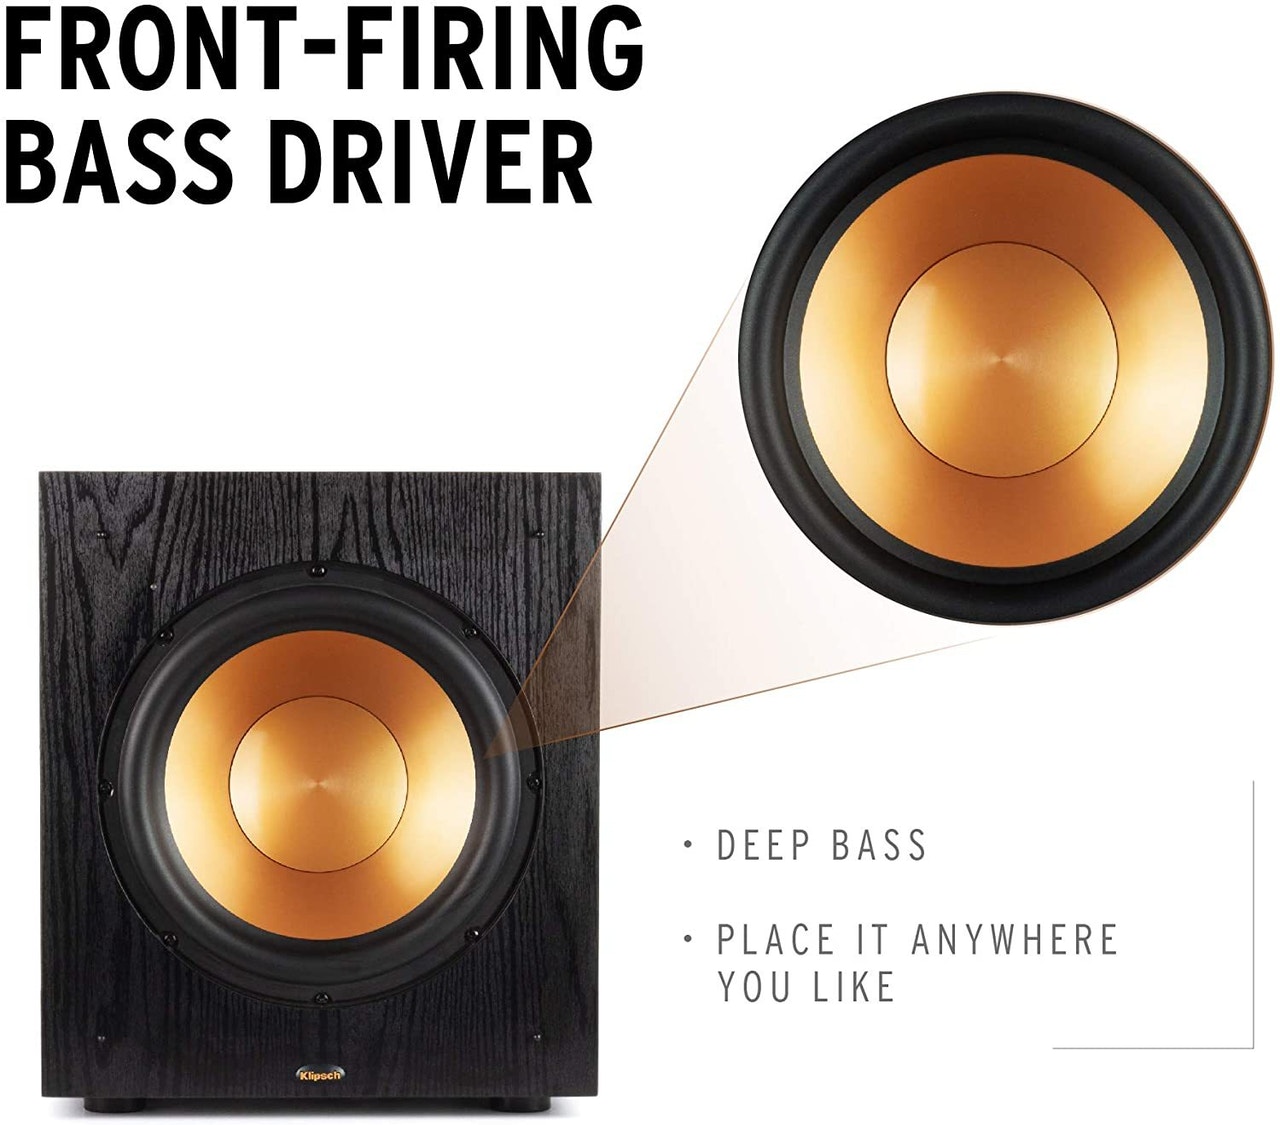 Klipsch Synergy Black Label Sub-100 - Subwoofer - 10" - black with copper accents - image 4 of 7